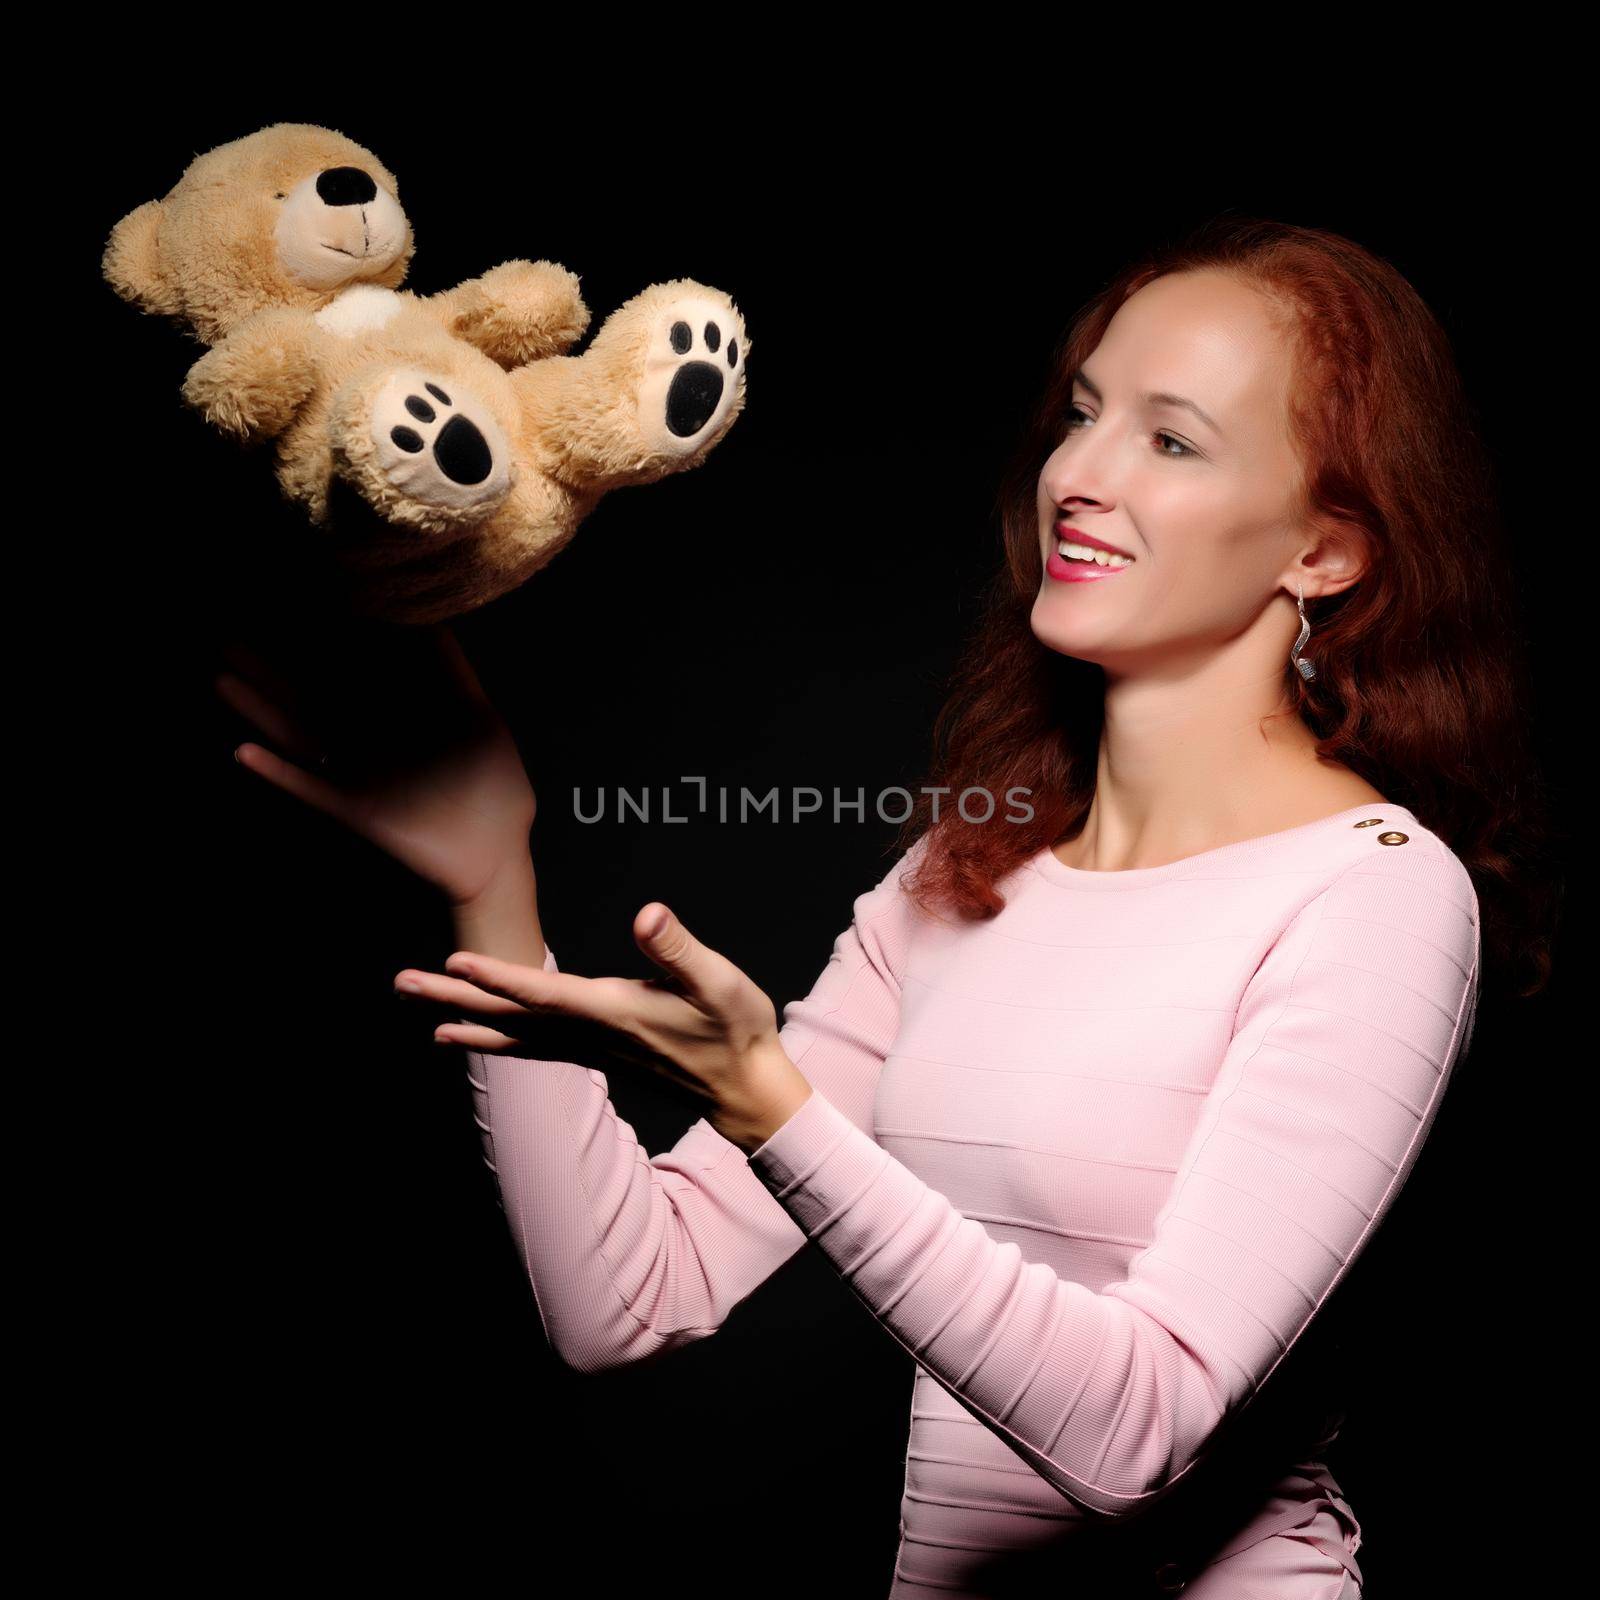 Fashion, artistic portrait of a beautiful redhead model girl, with long hair on a black background. Posing with a teddy bear.